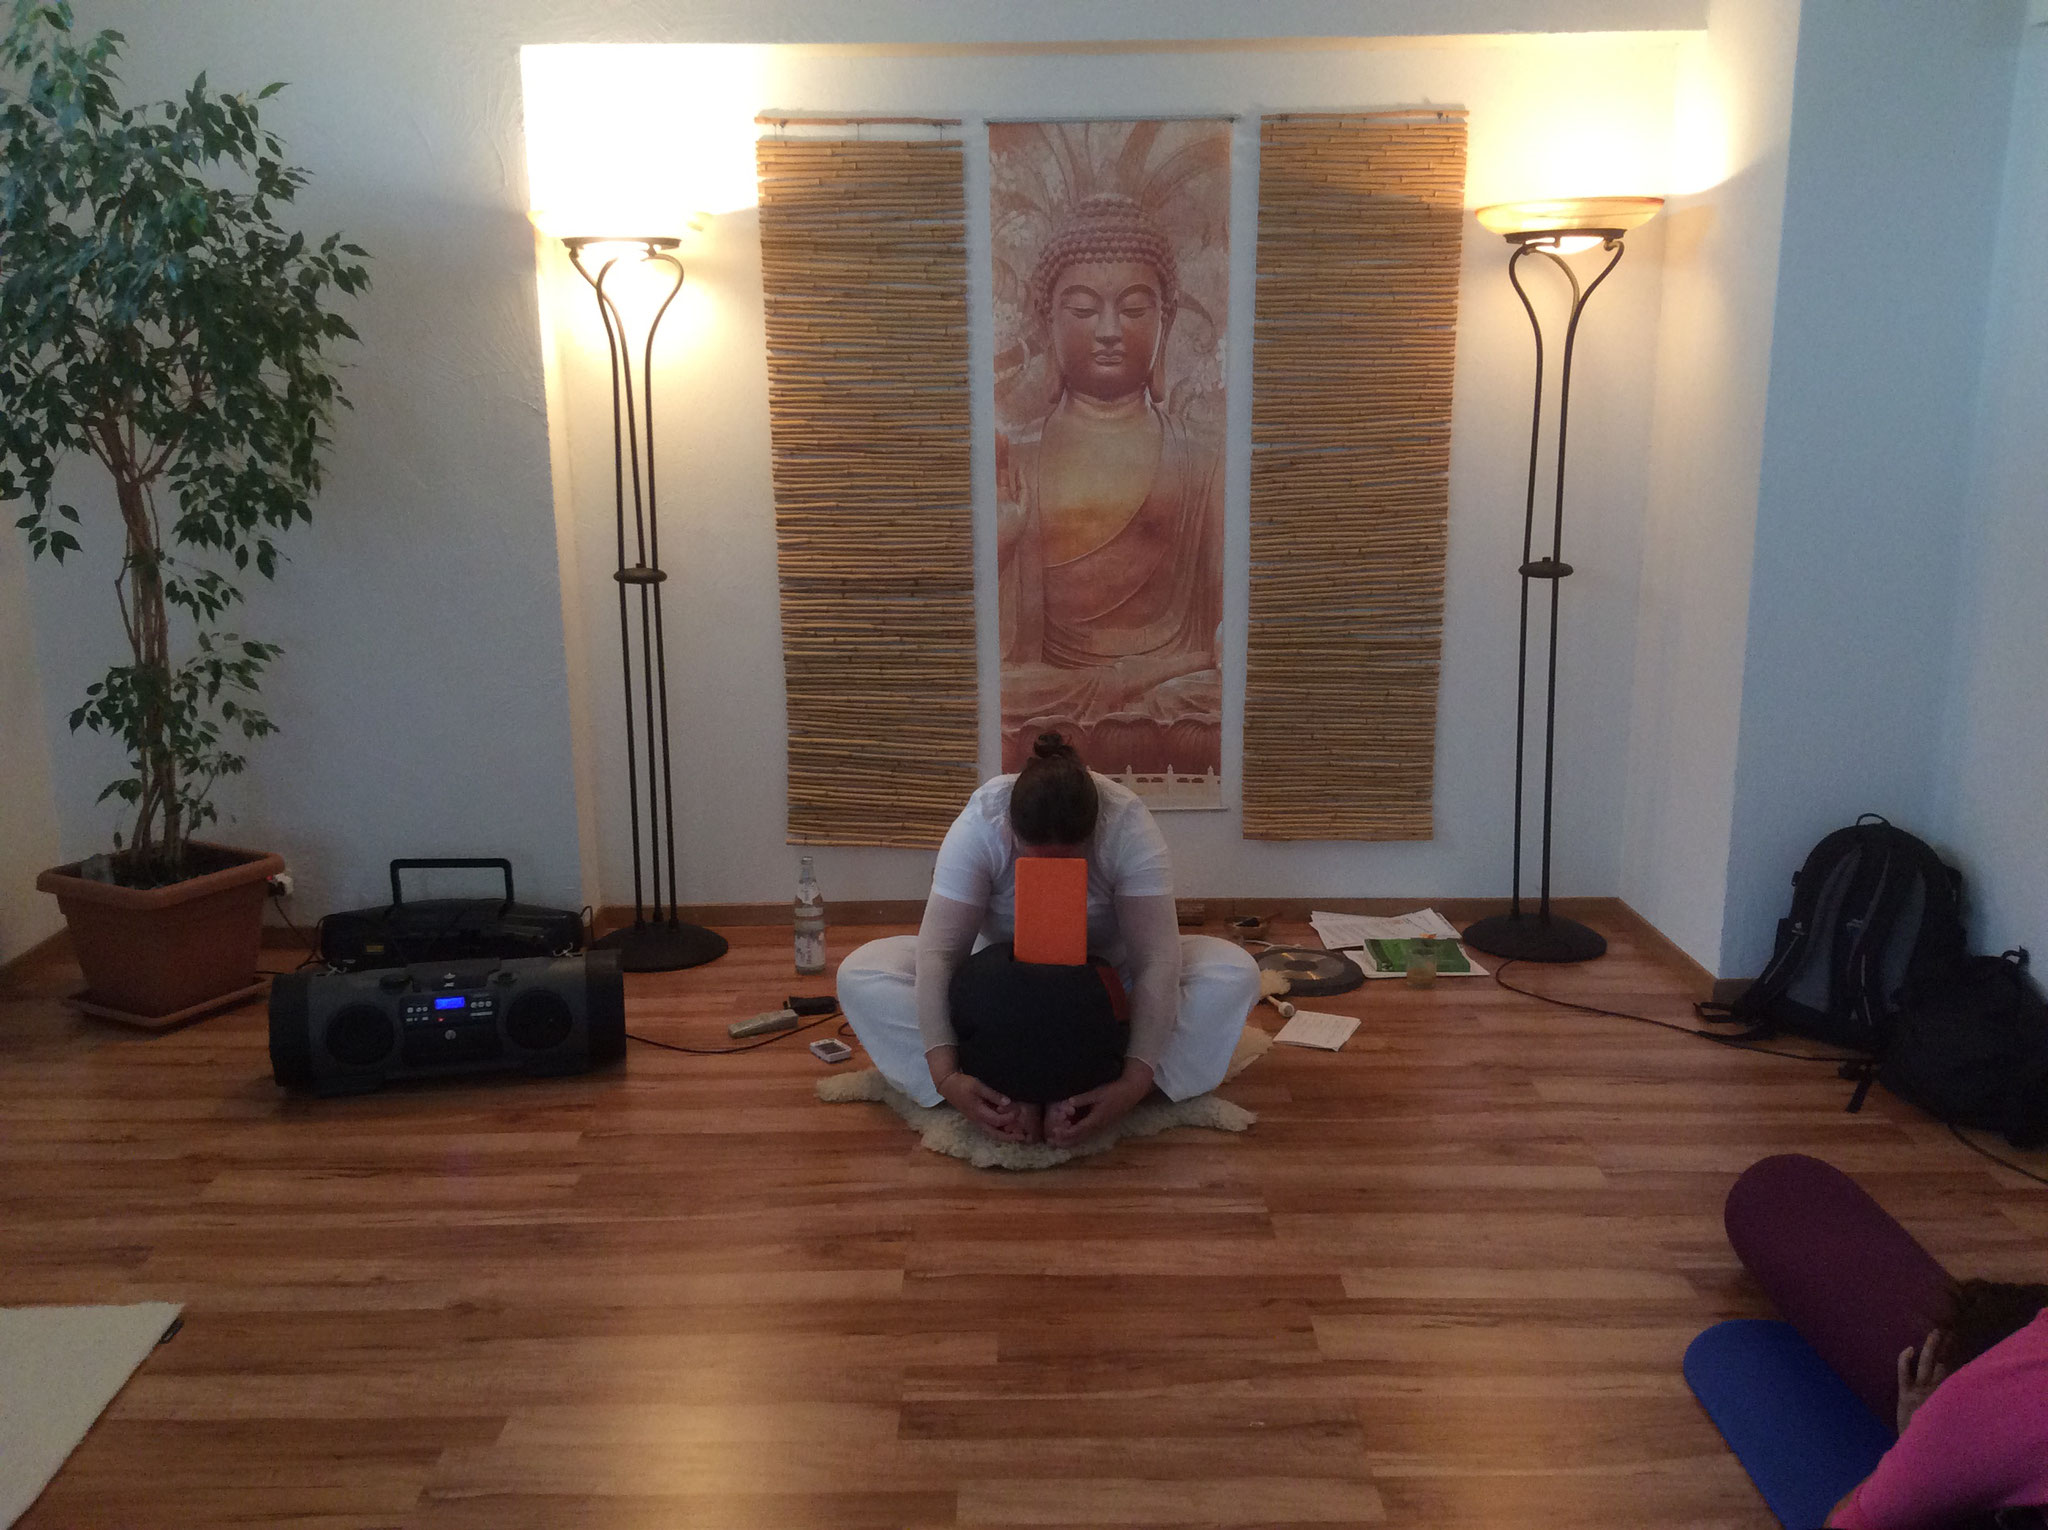 Yin Yoga with props - nice - Yogateacher needs more props than students :)